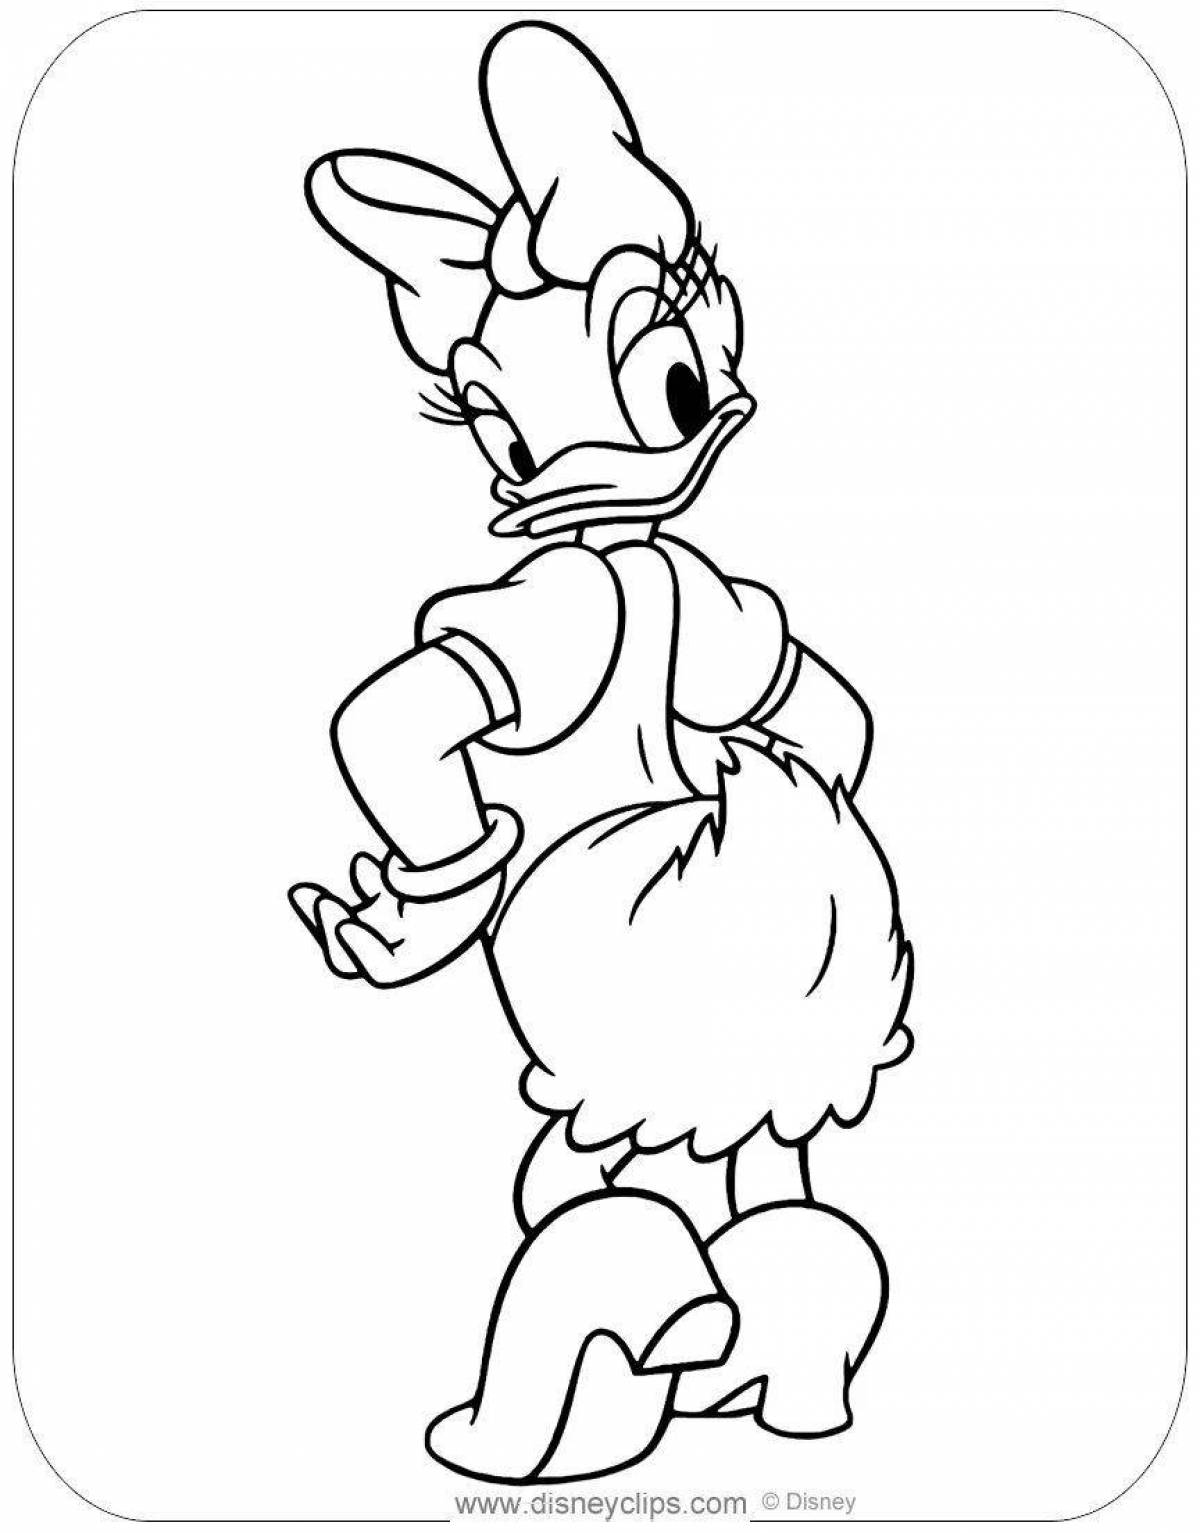 Chamomile coloring page